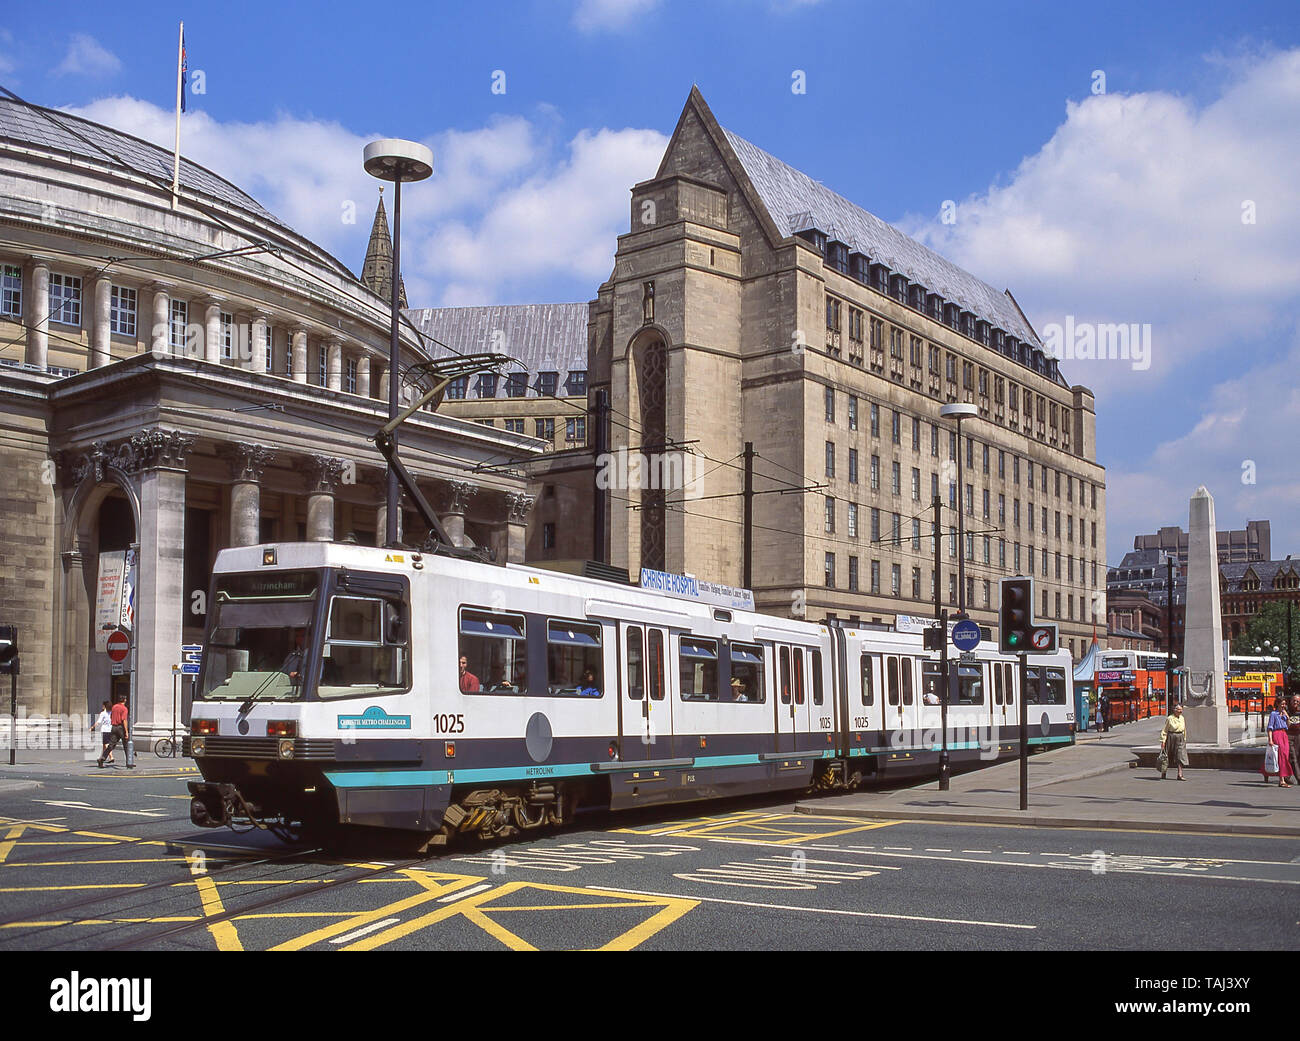 Manchester Metrolink tram, St Peter's Square, Manchester, Greater Manchester, England, United Kingdom Stock Photo